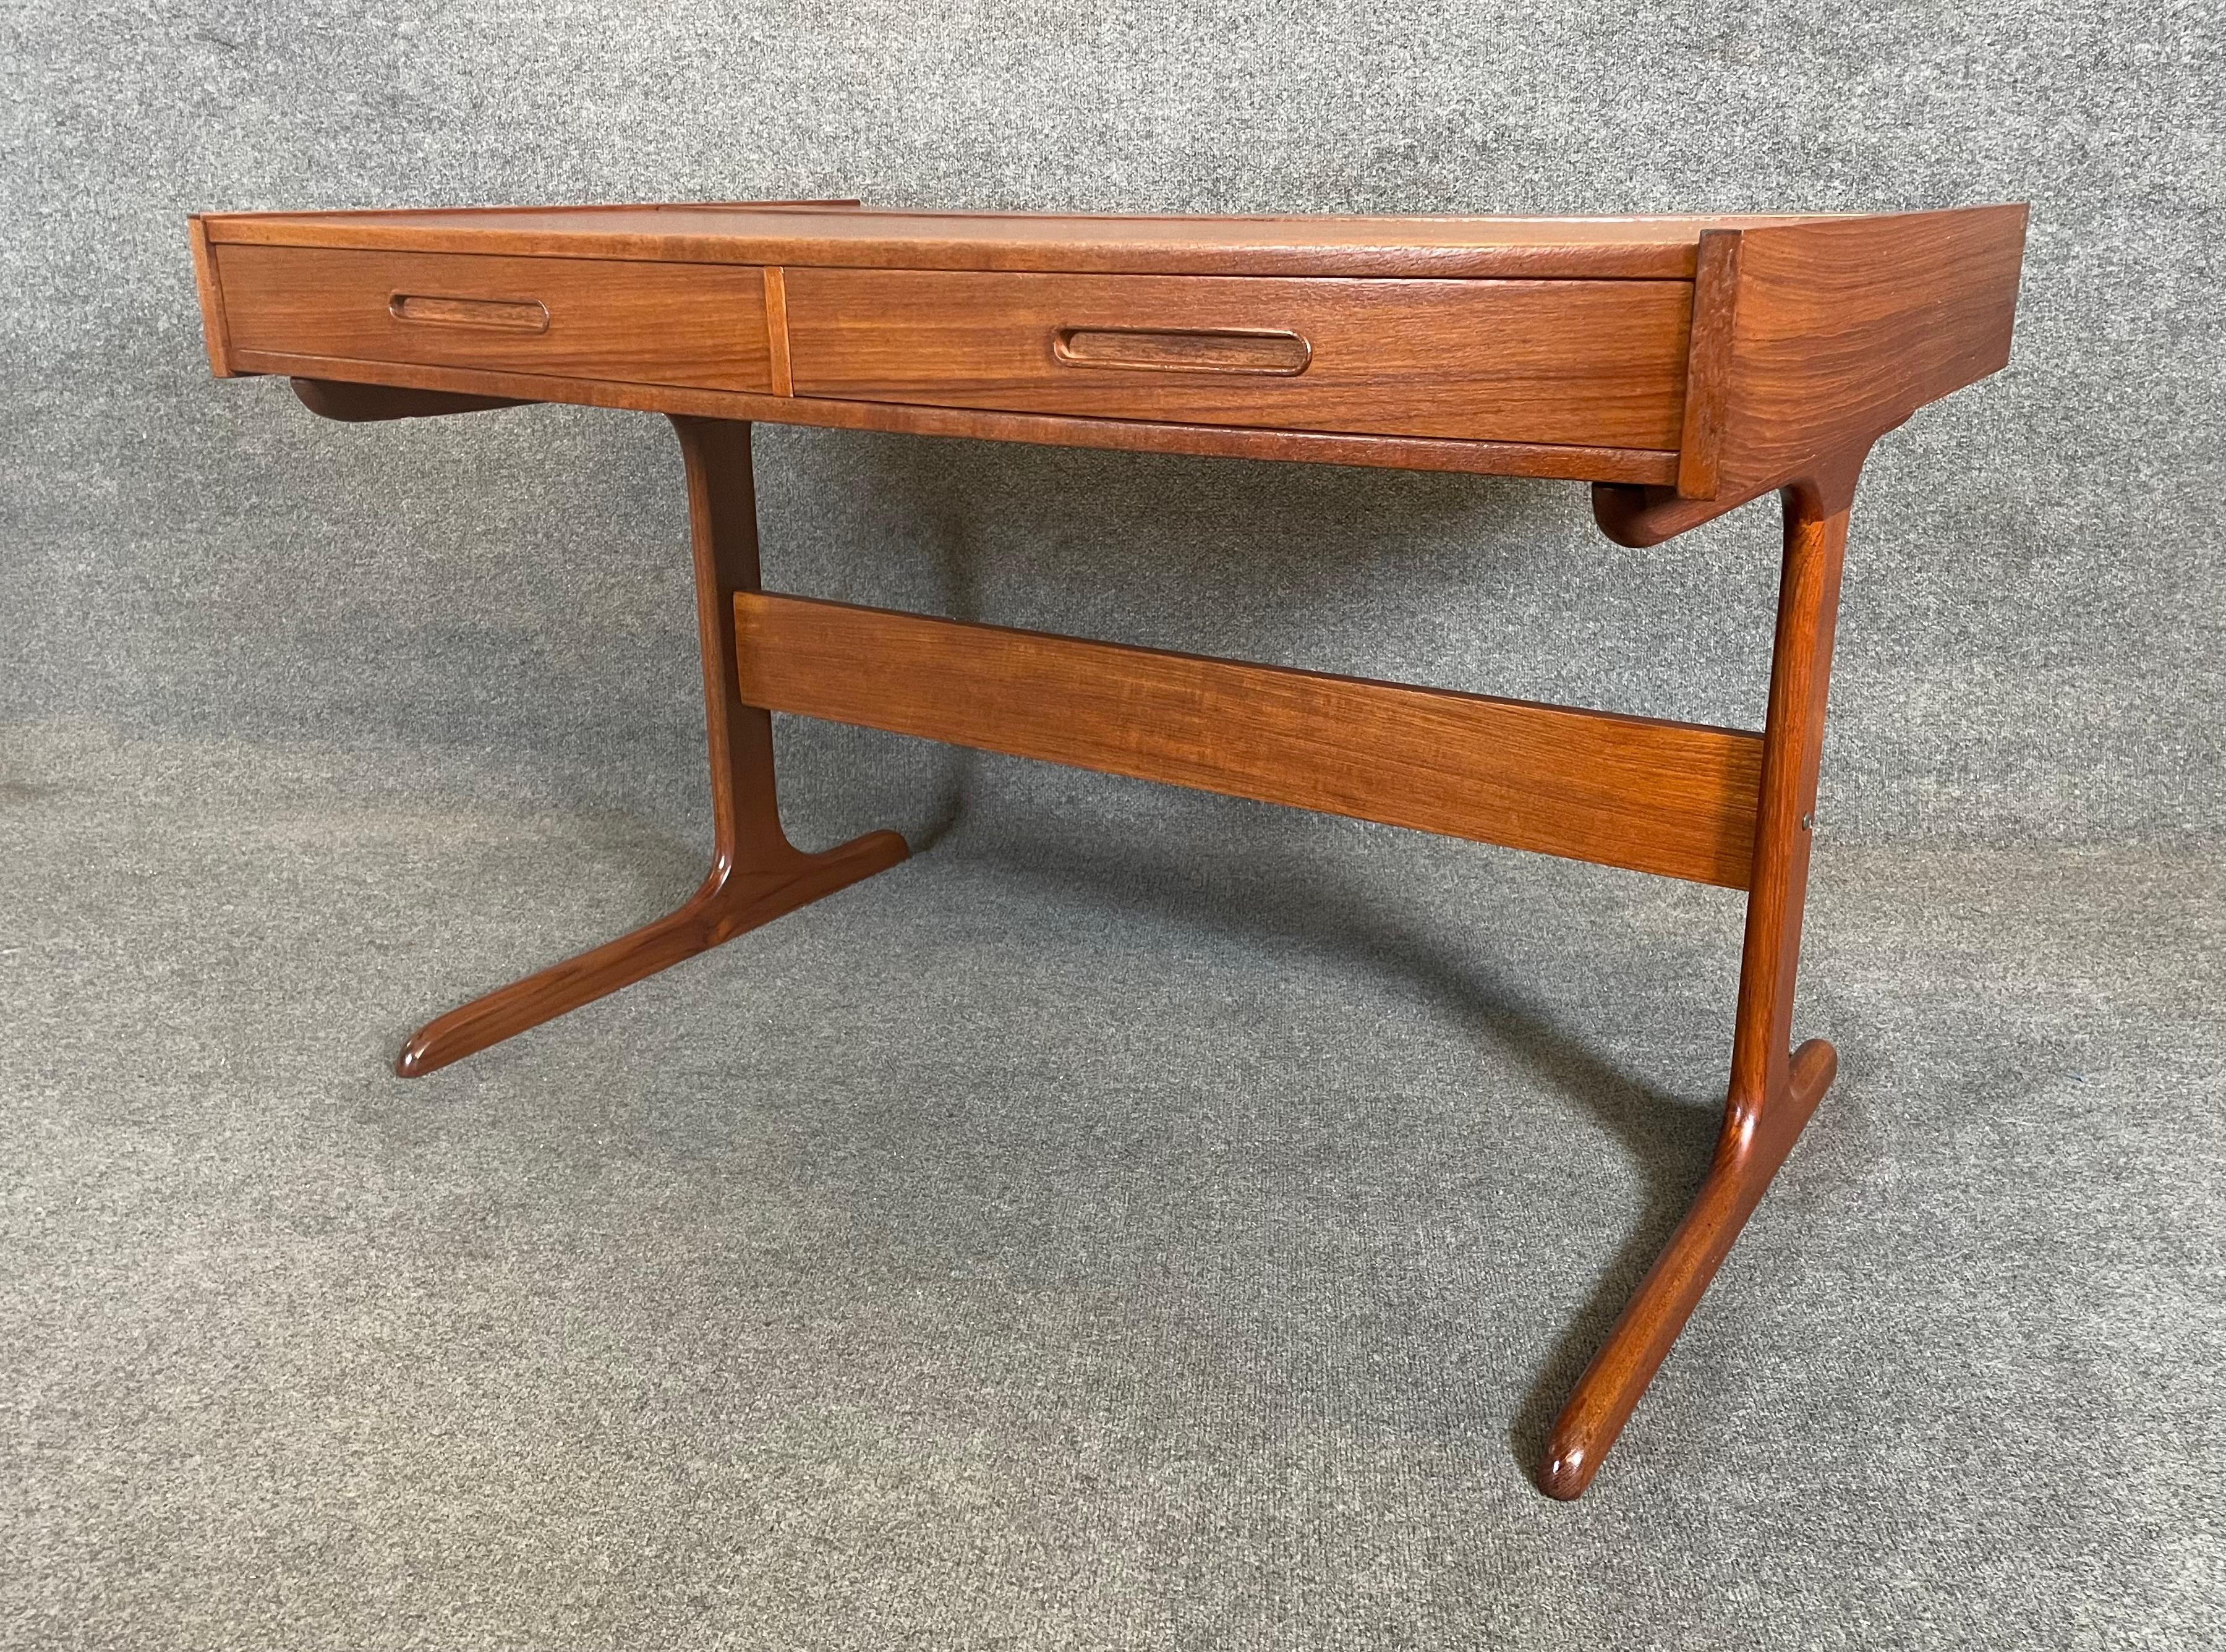 Here is a beautiful Scandinavian modern writing desk in teak manufactured in Denmark in the 1960's.
This rare piece, recently imported from Europe to California before its refinishing, features a vibrant wood grain, a large writing desk top with pop